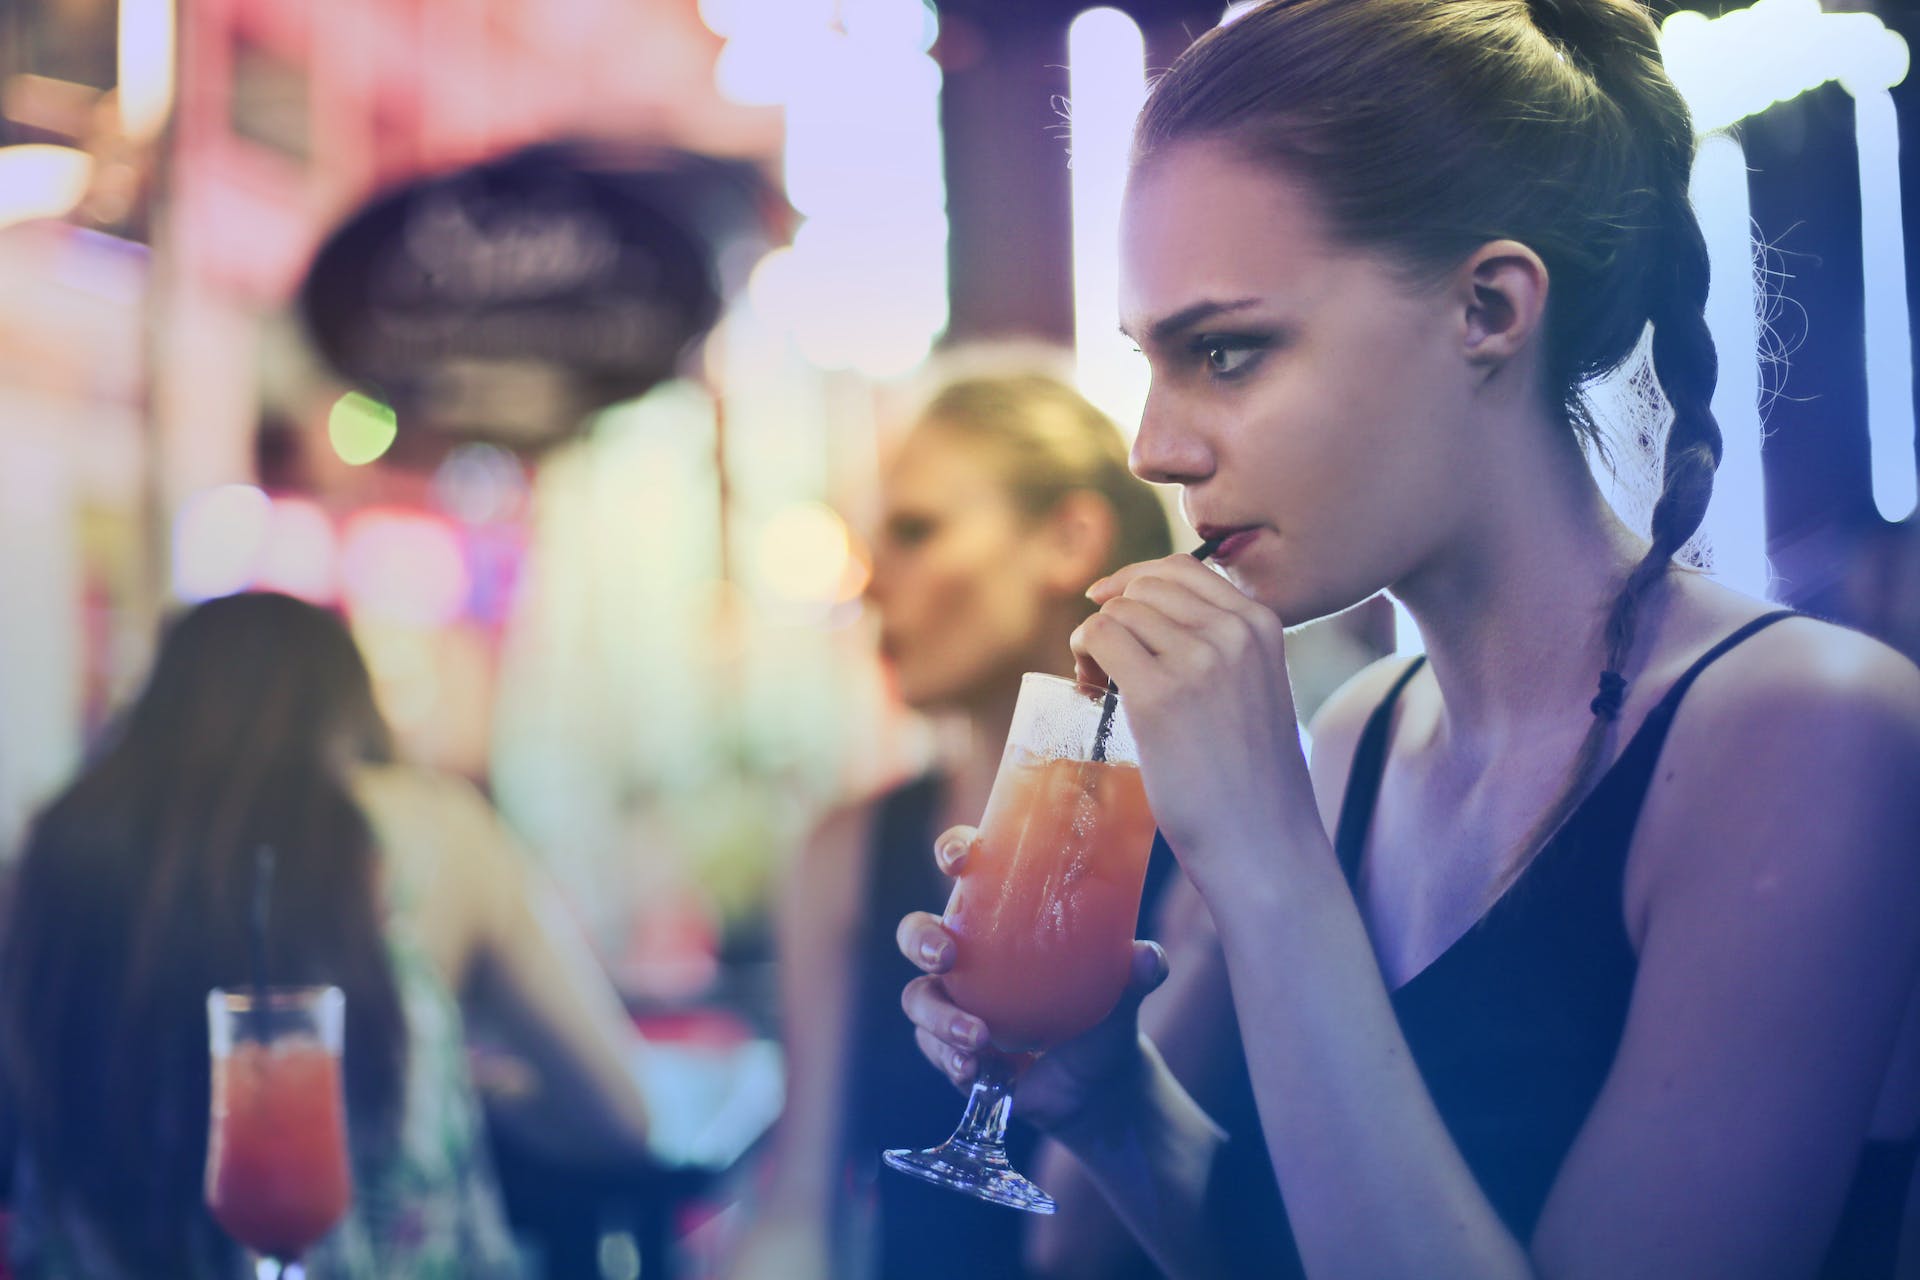 Woman sipping on a cocktail | Source: Pexels